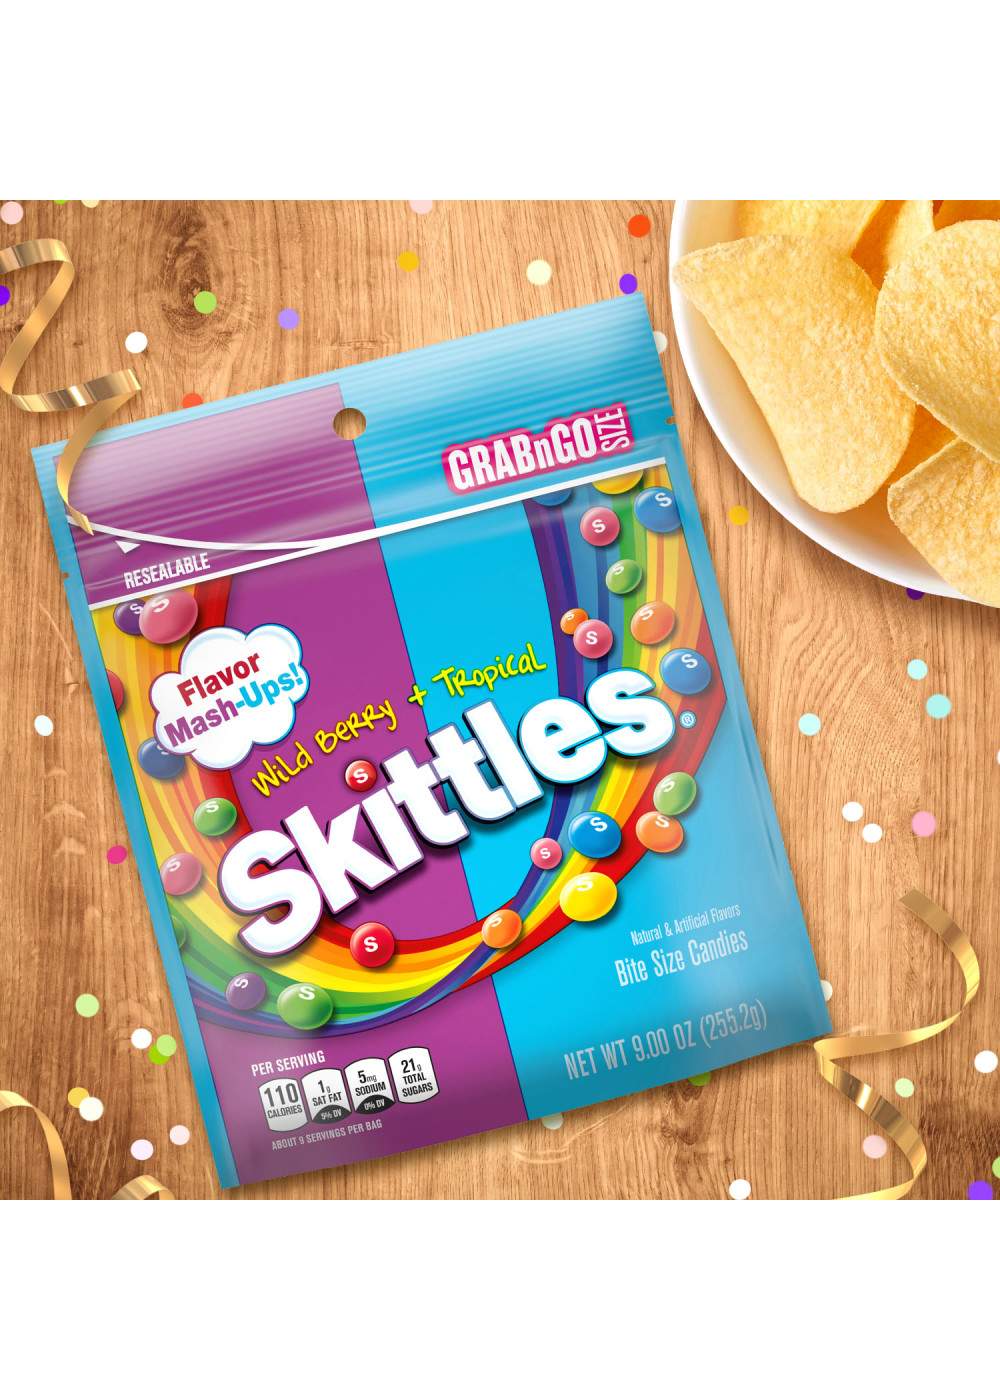 Skittles Wild Berry & Tropical Flavor Mash-Ups - Grab n Go Size; image 8 of 9